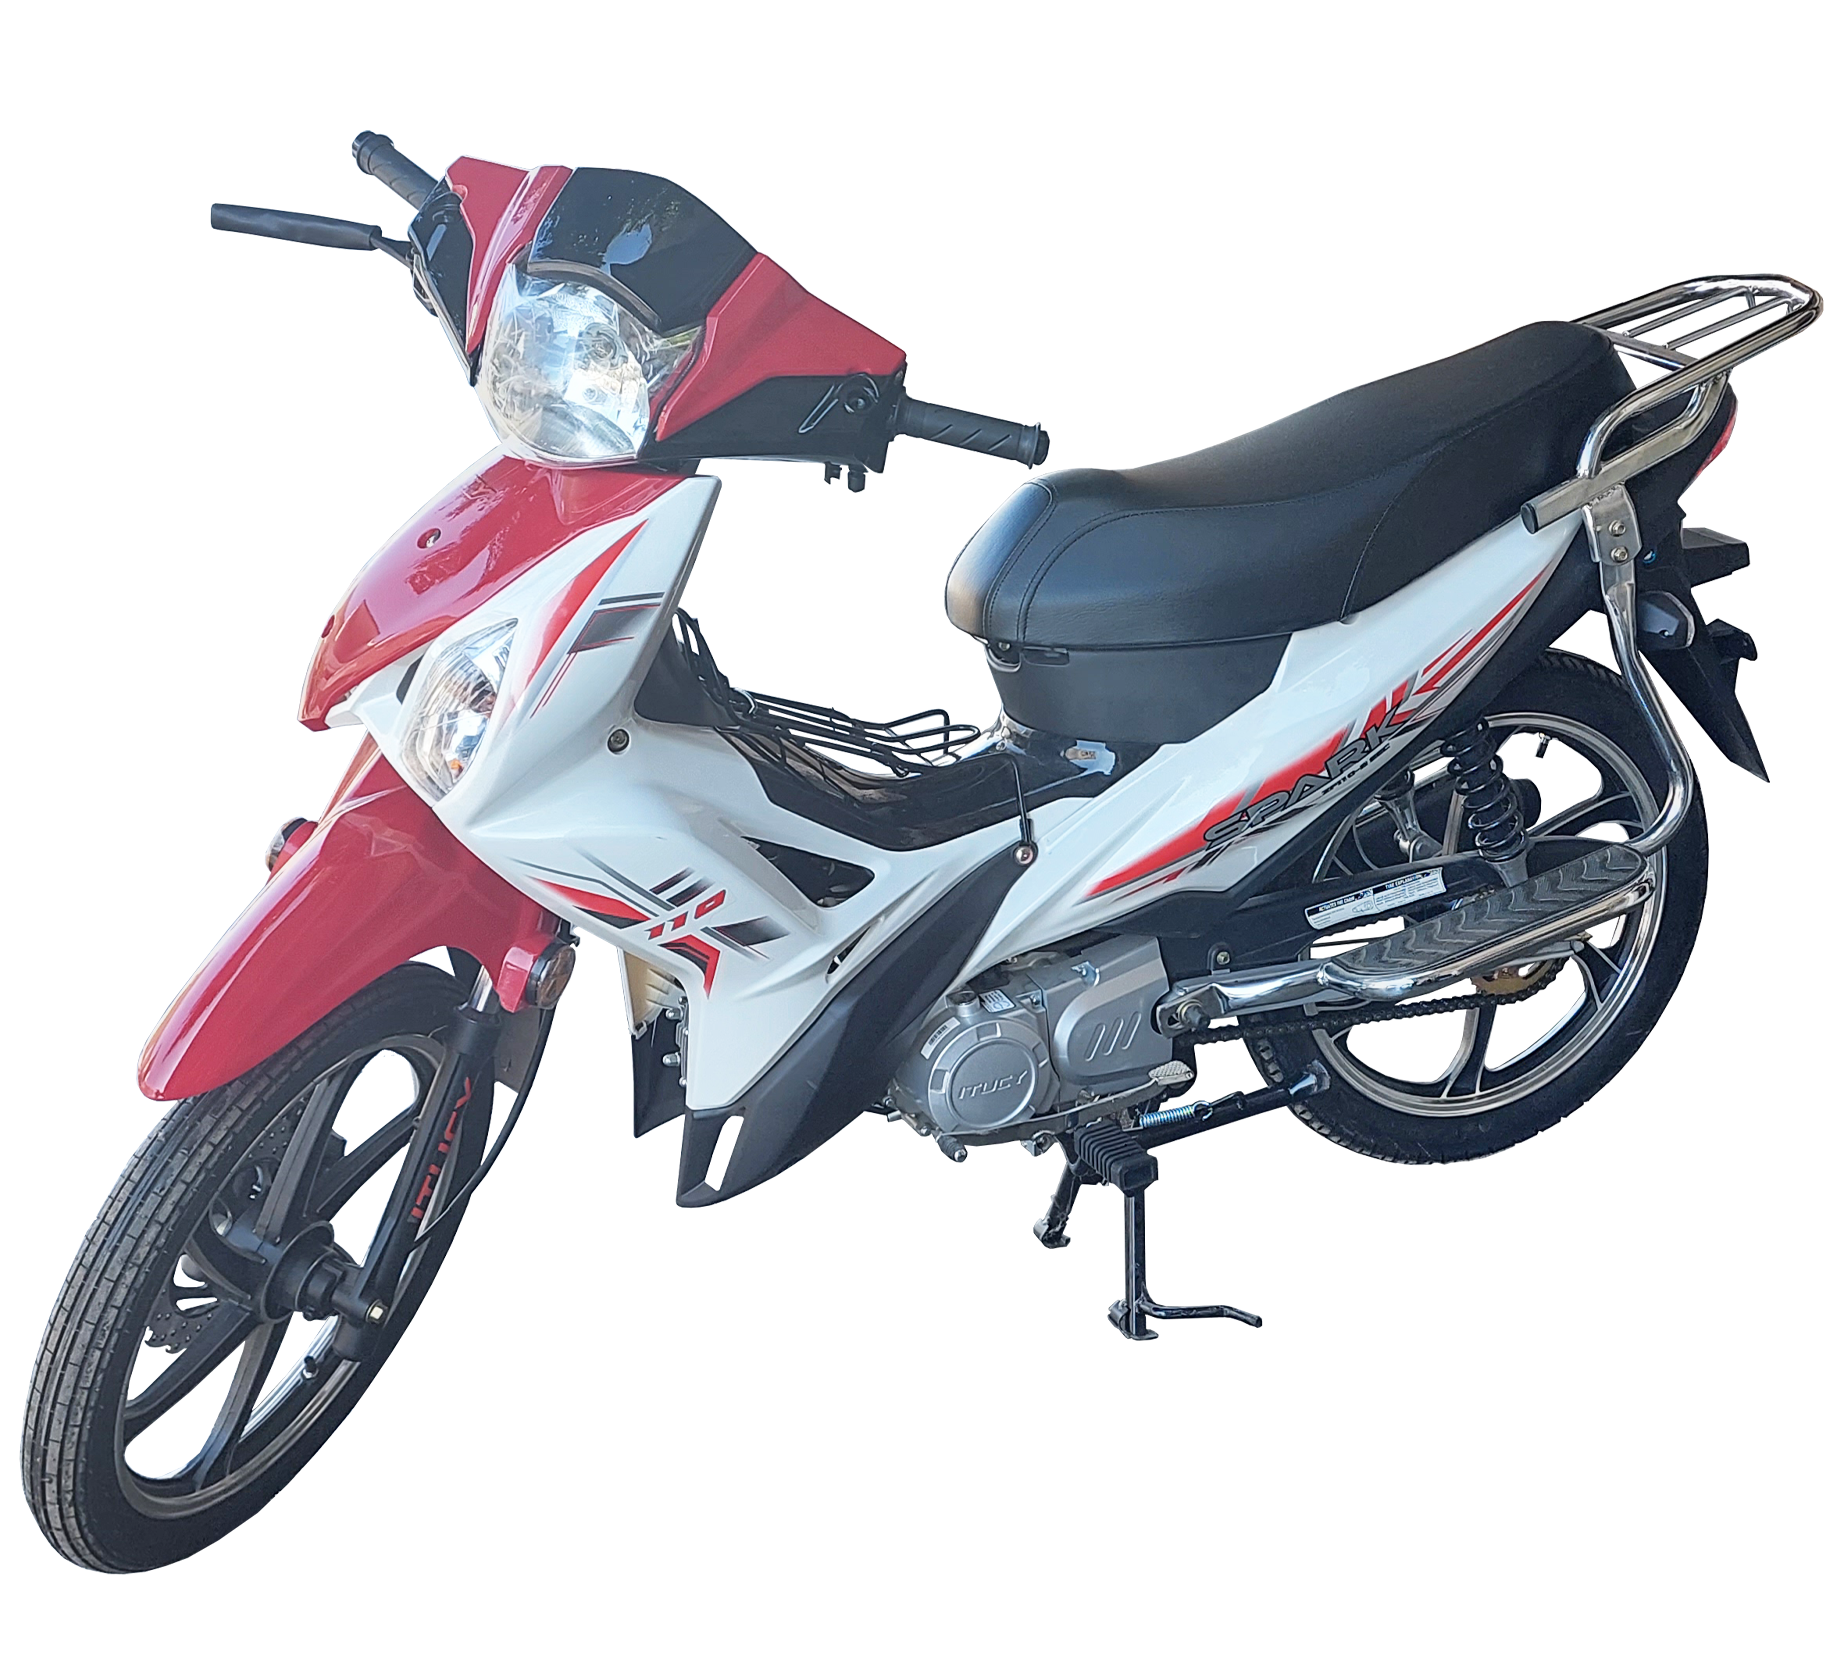 MOTOCYCLE-SPARK-ZF110-110CC-BLANC-ROUGE-CARTE-GRISE